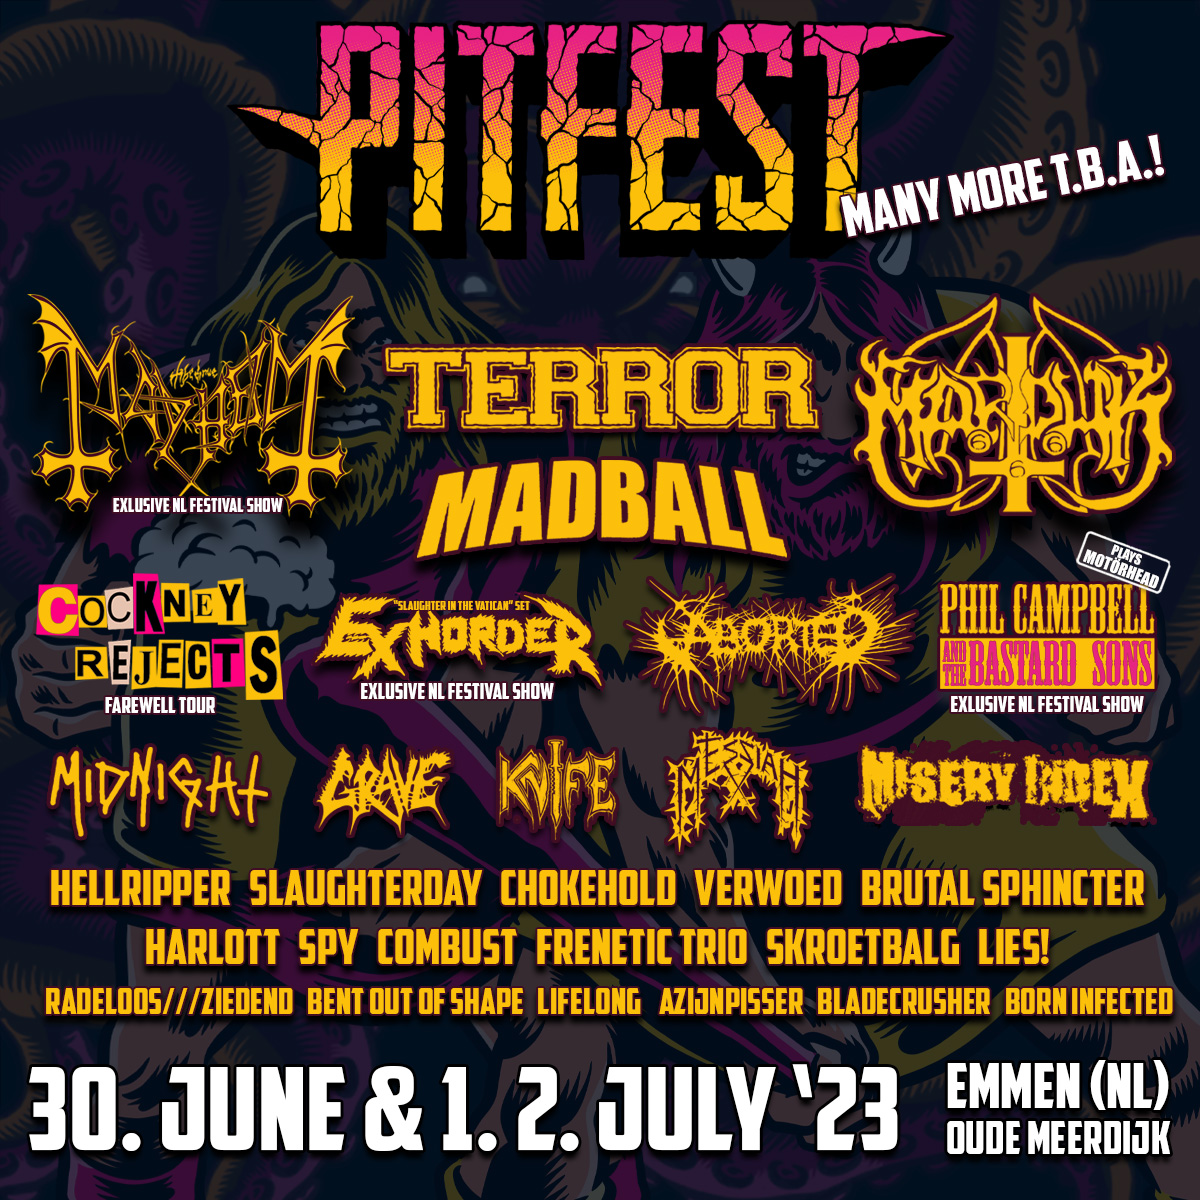 Terror, Marduk, Madball and more on Pitfest 2023!